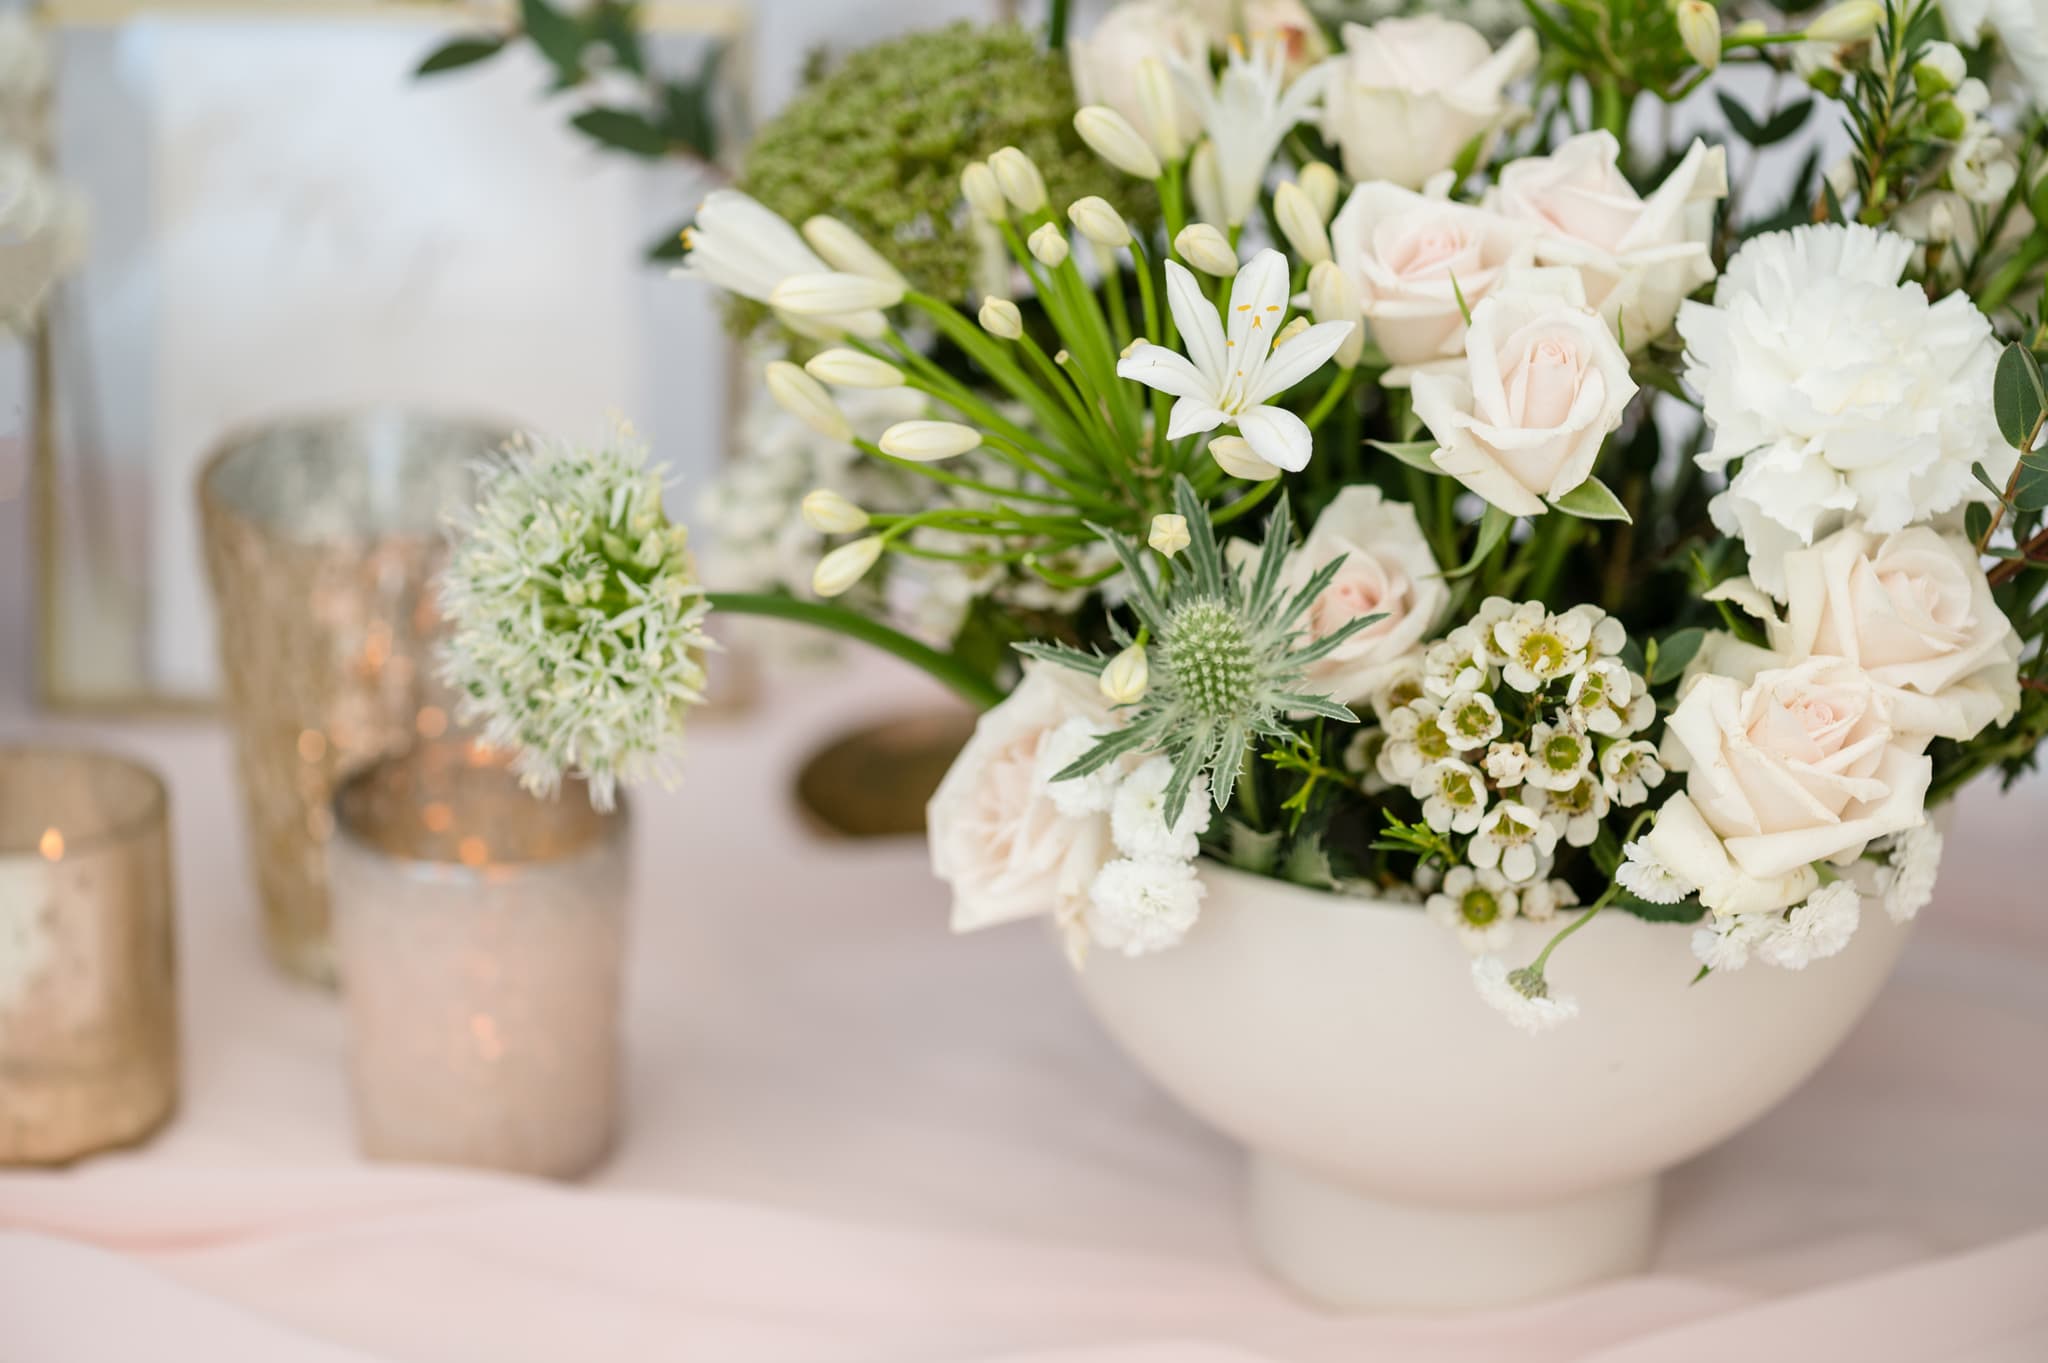 White spring flowers in a ceramic bowl on top of a pale pink table runner